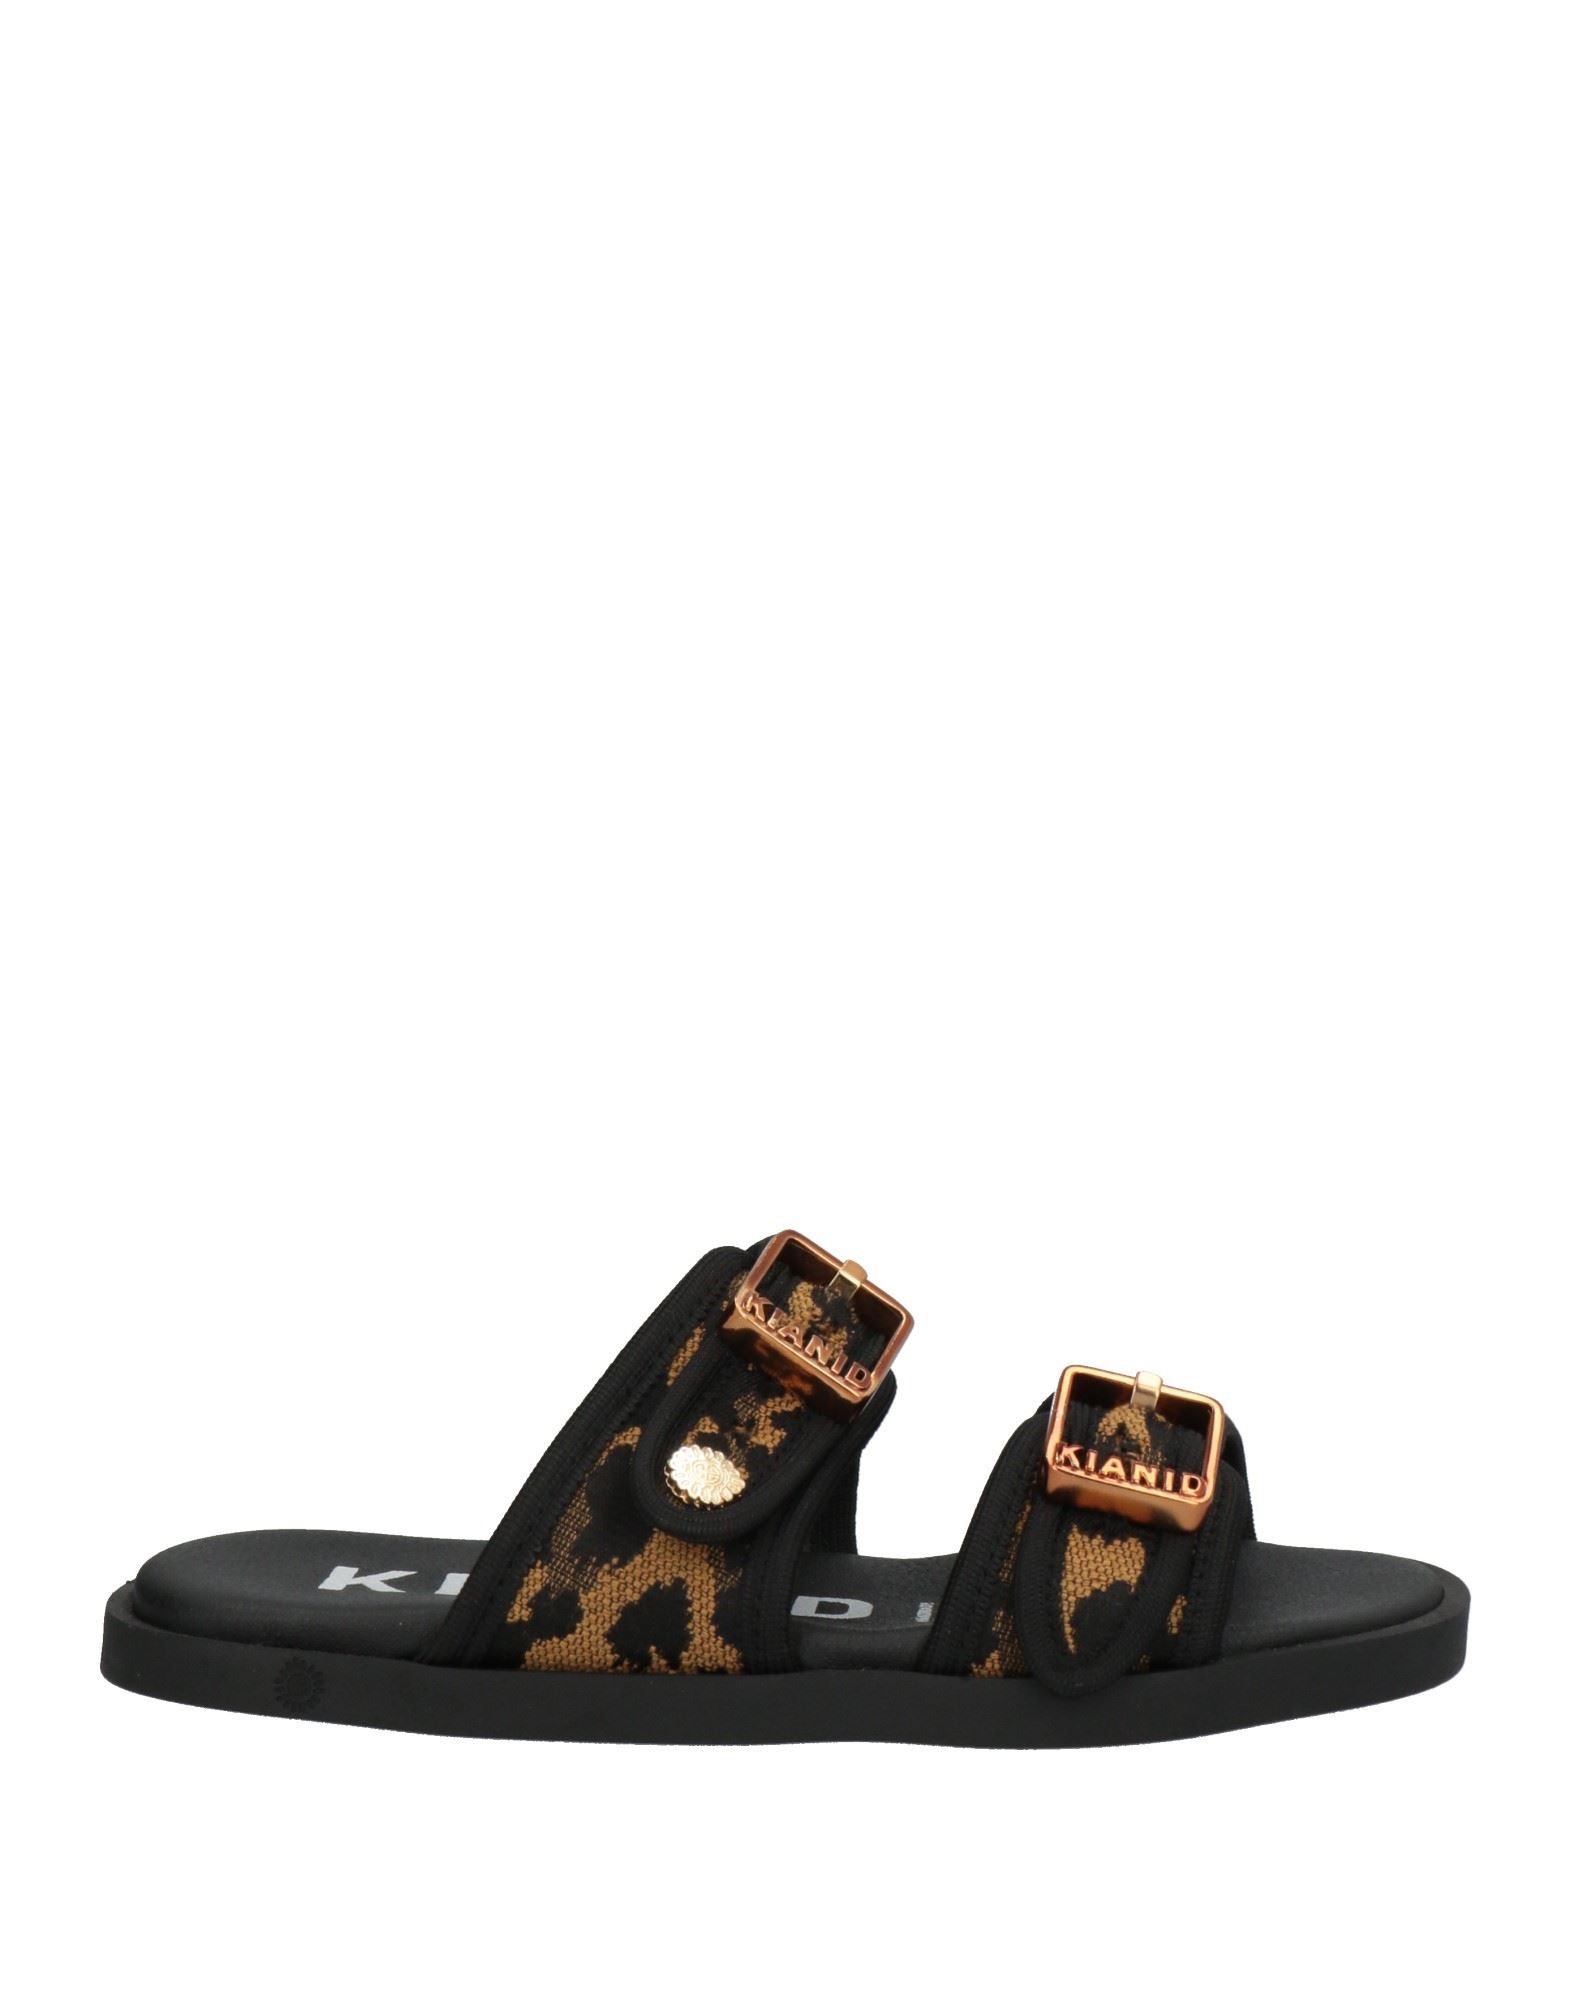 Kianid Sandals In Camel